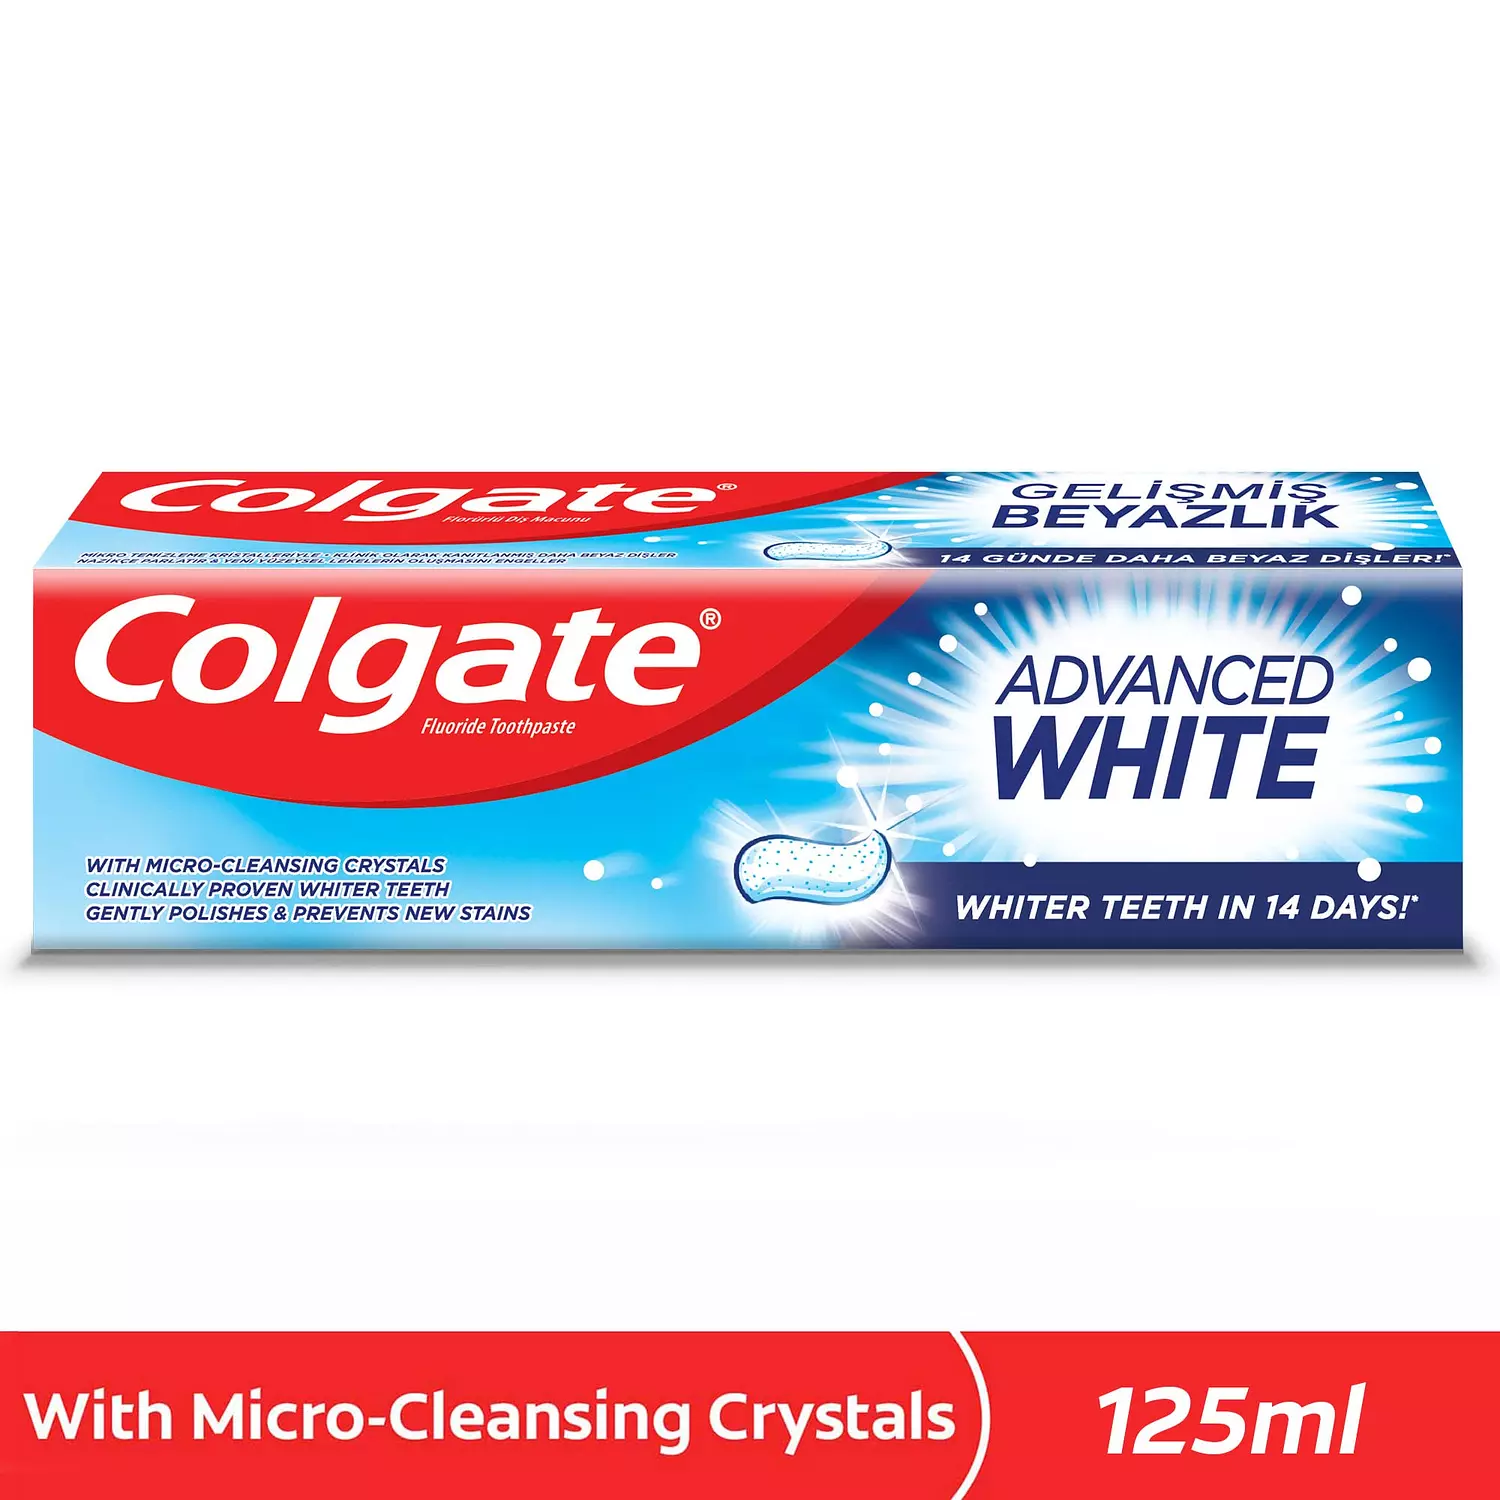 Colgate Advanced Whitening Toothpaste 125ml hover image